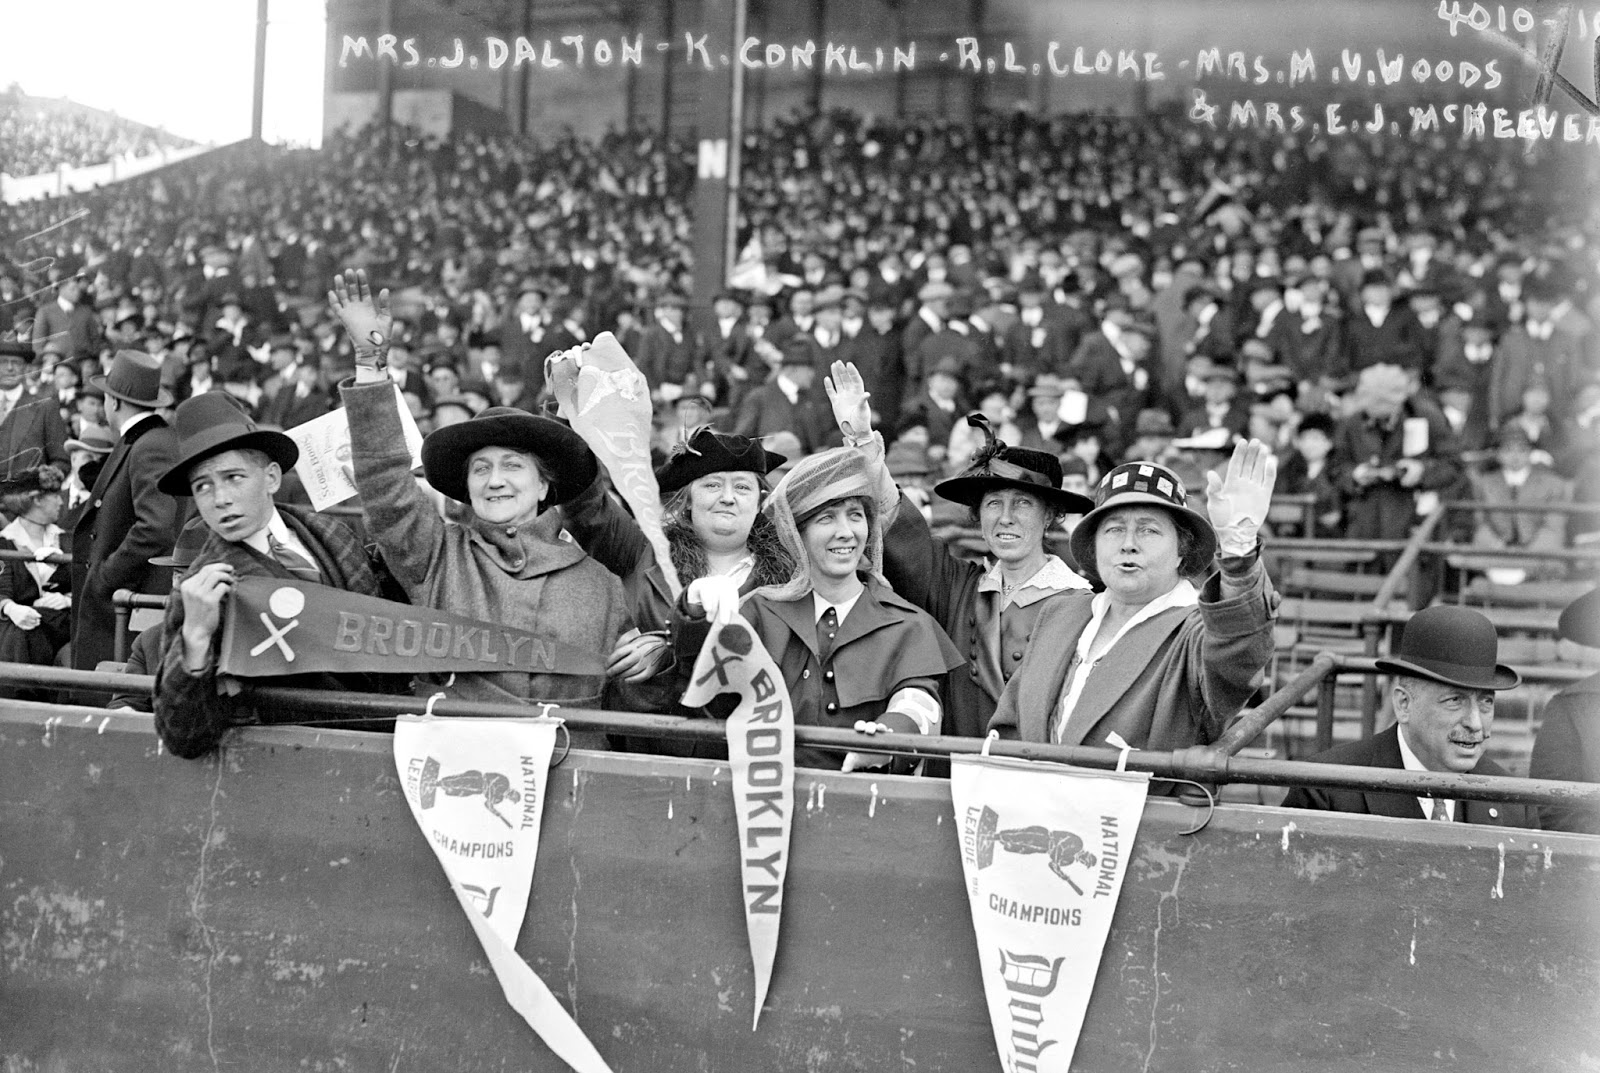 Brooklyn baseball fans at the 1916 World Series seated with Jennie Veronica Murphy McKeever, wife of one of the Brooklyn team's owners.jpg